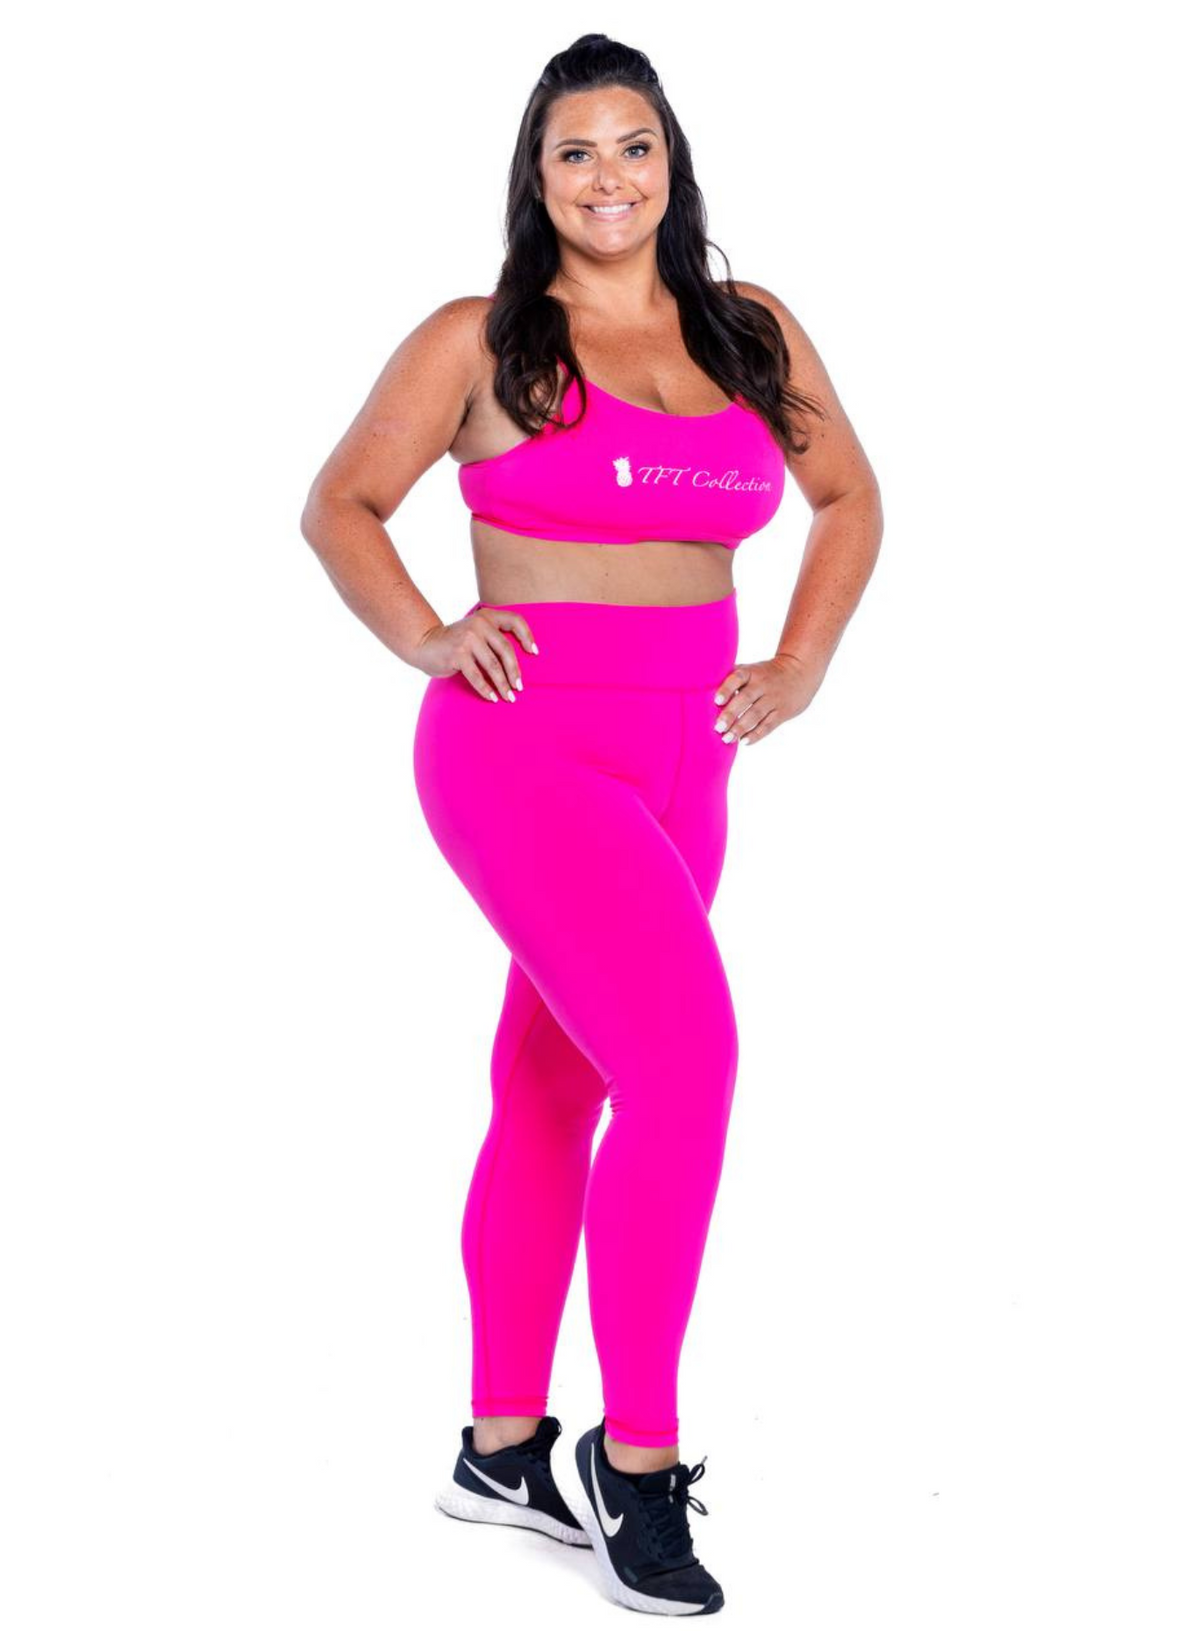 Plus Size Leggings for Women, Blue, Orange and Hot Pink Groovy Abstrac – My  Rubio Garden